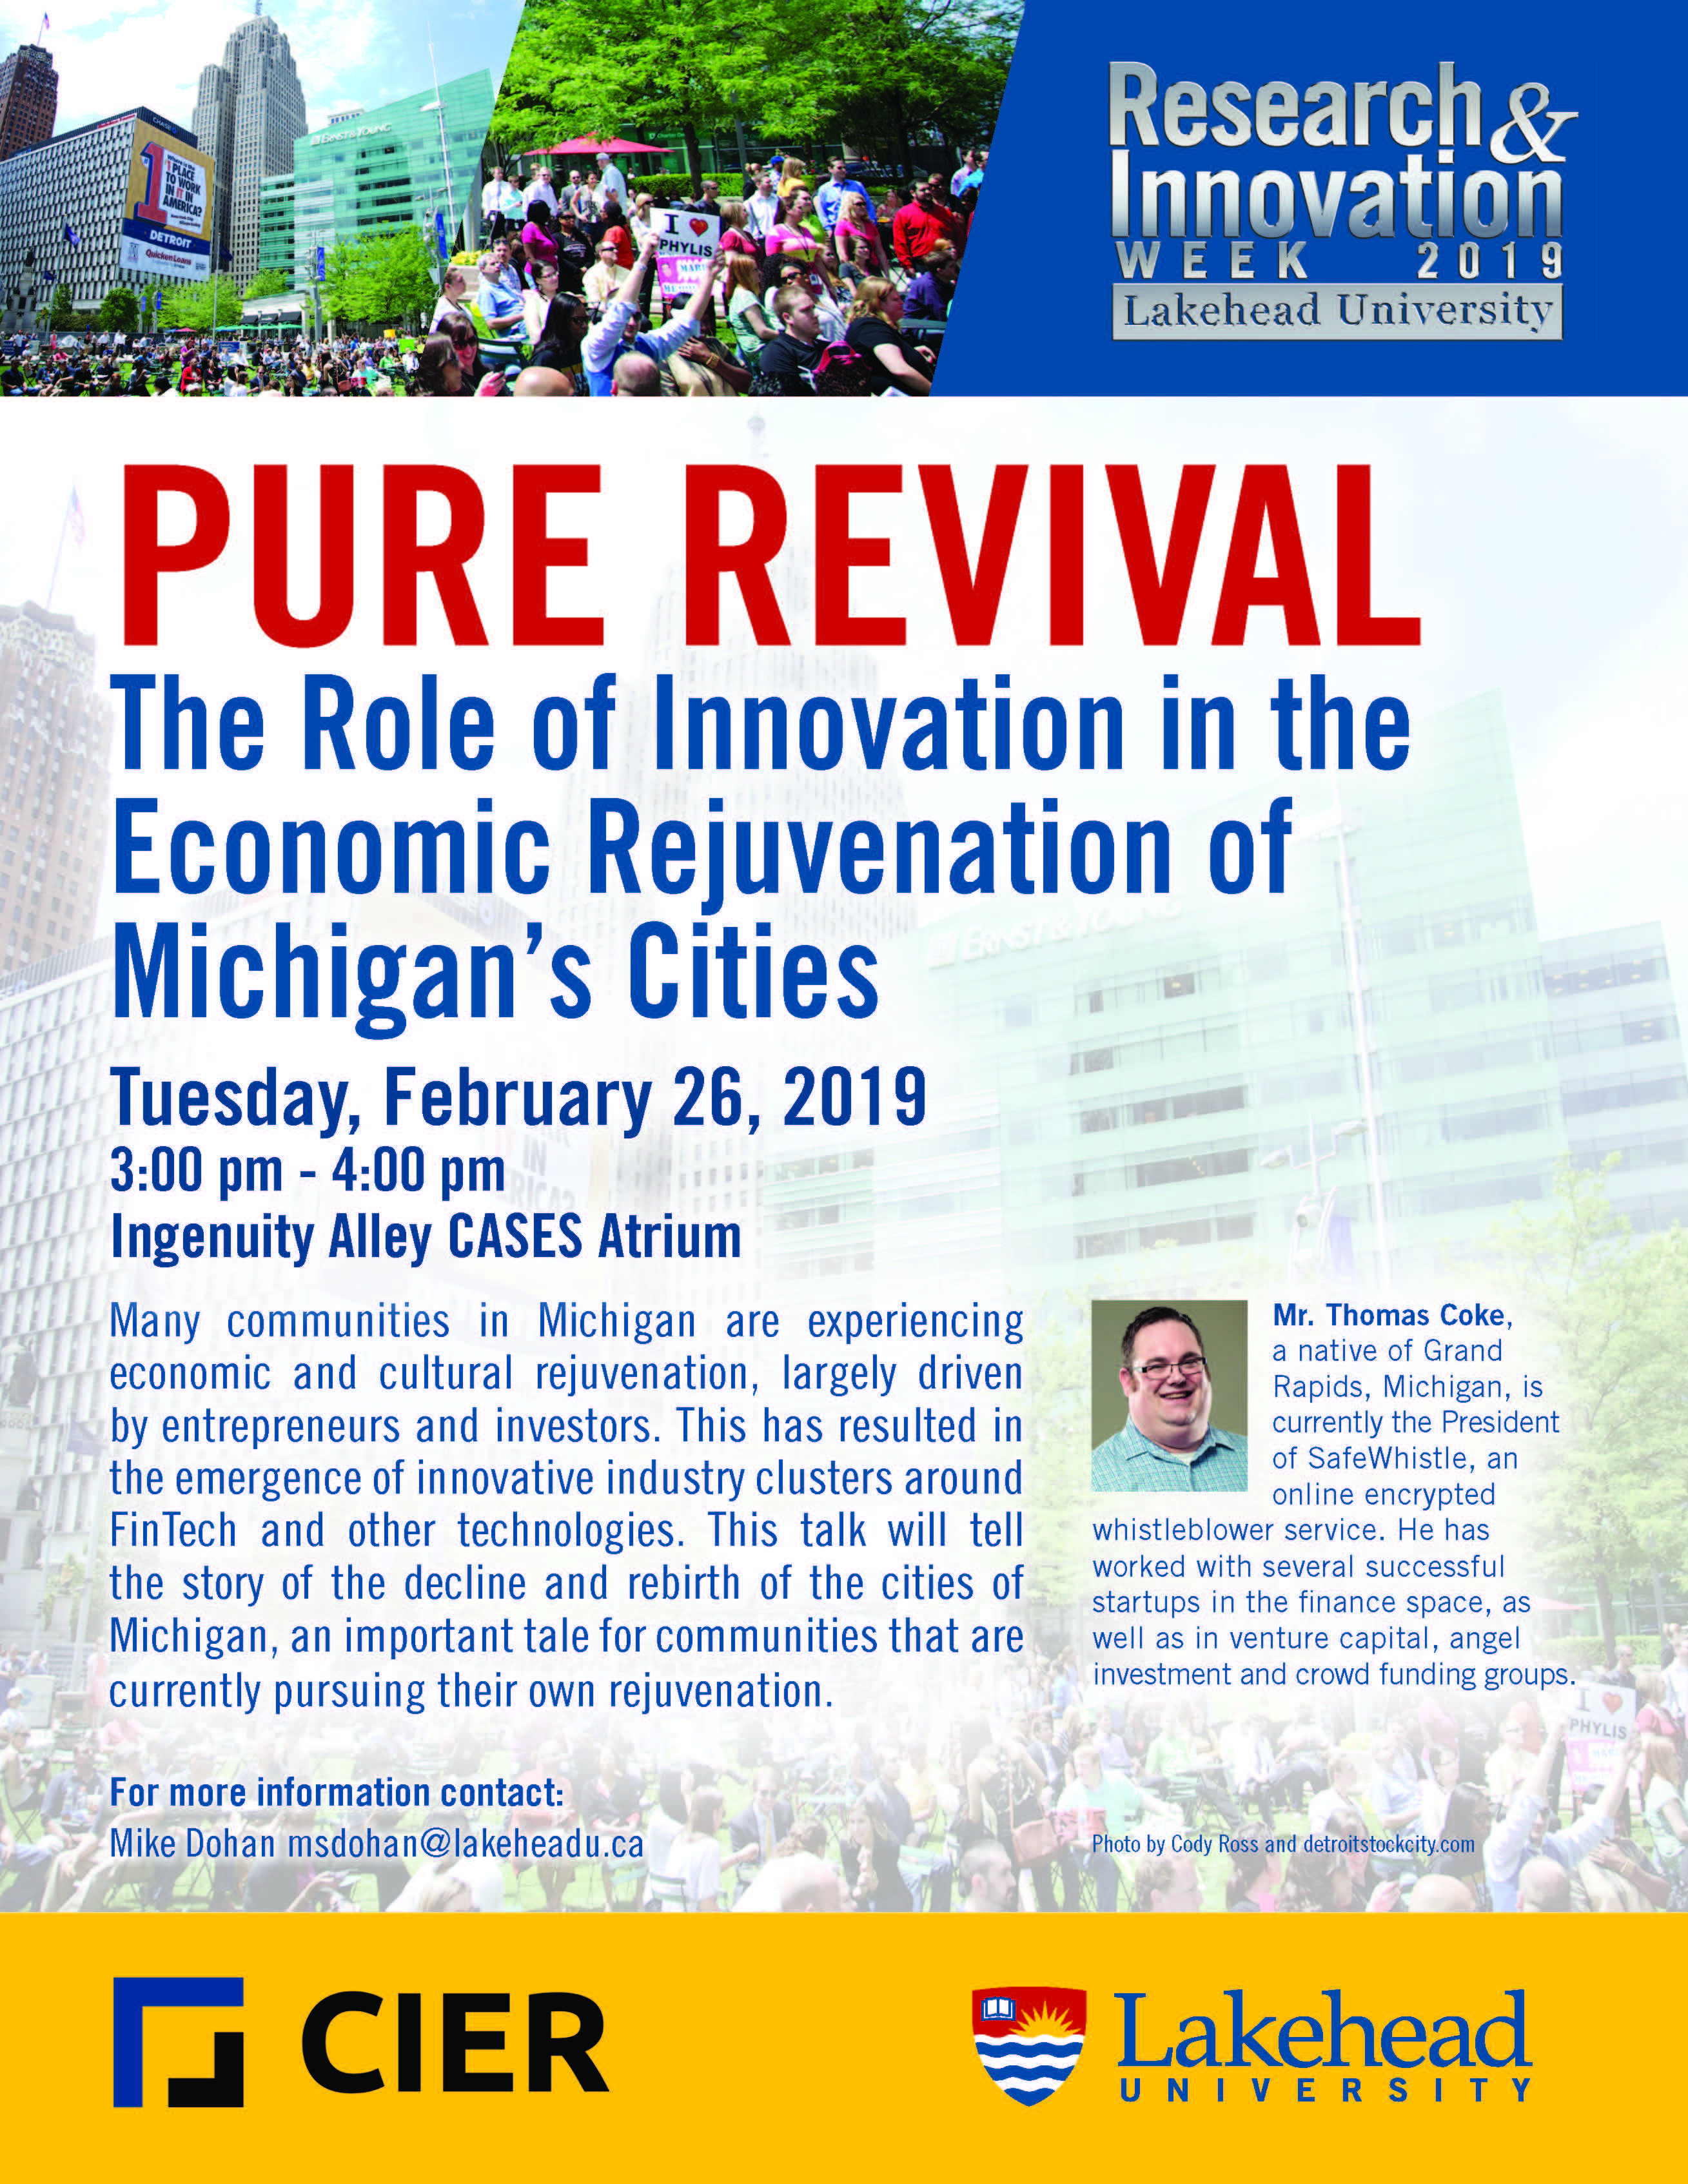 Pure Revival Poster